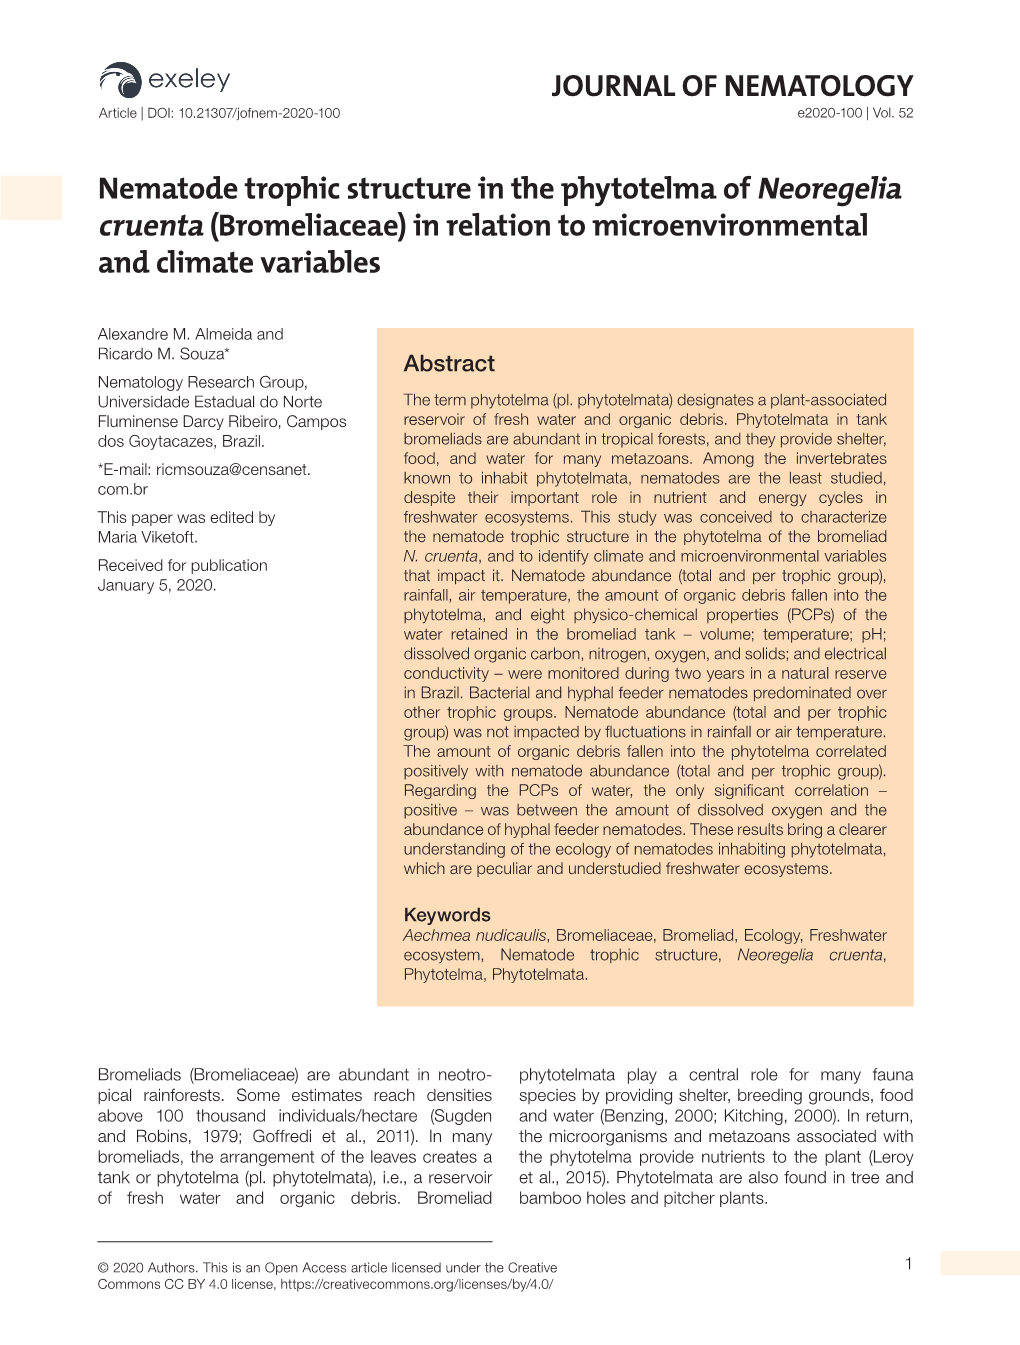 Nematode Trophic Structure in the Phytotelma of Neoregelia Cruenta (Bromeliaceae) in Relation to Microenvironmental and Climate Variables